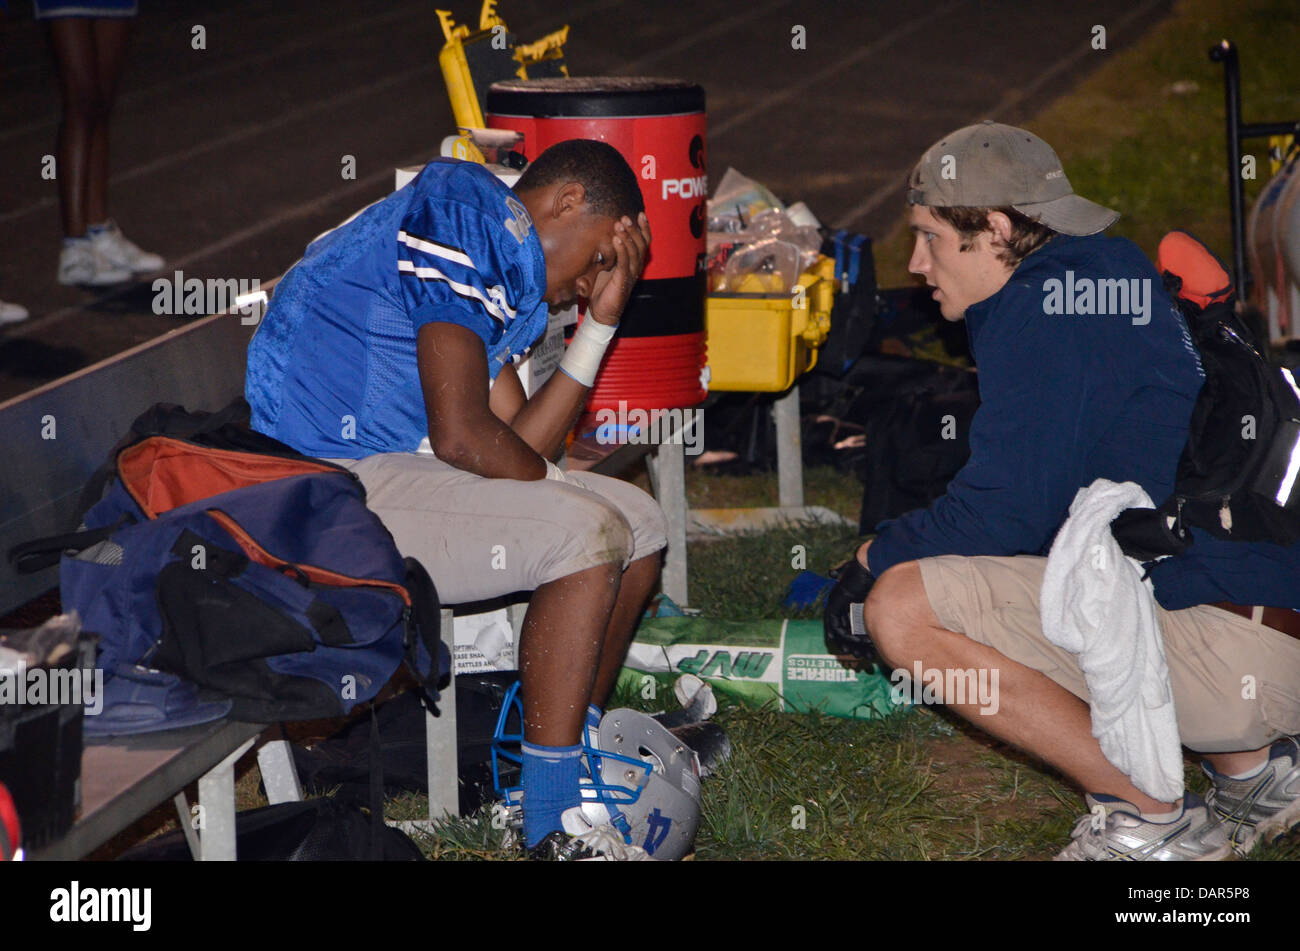 Medic questioning player who was injured and removed from a high school football game in Md Stock Photo